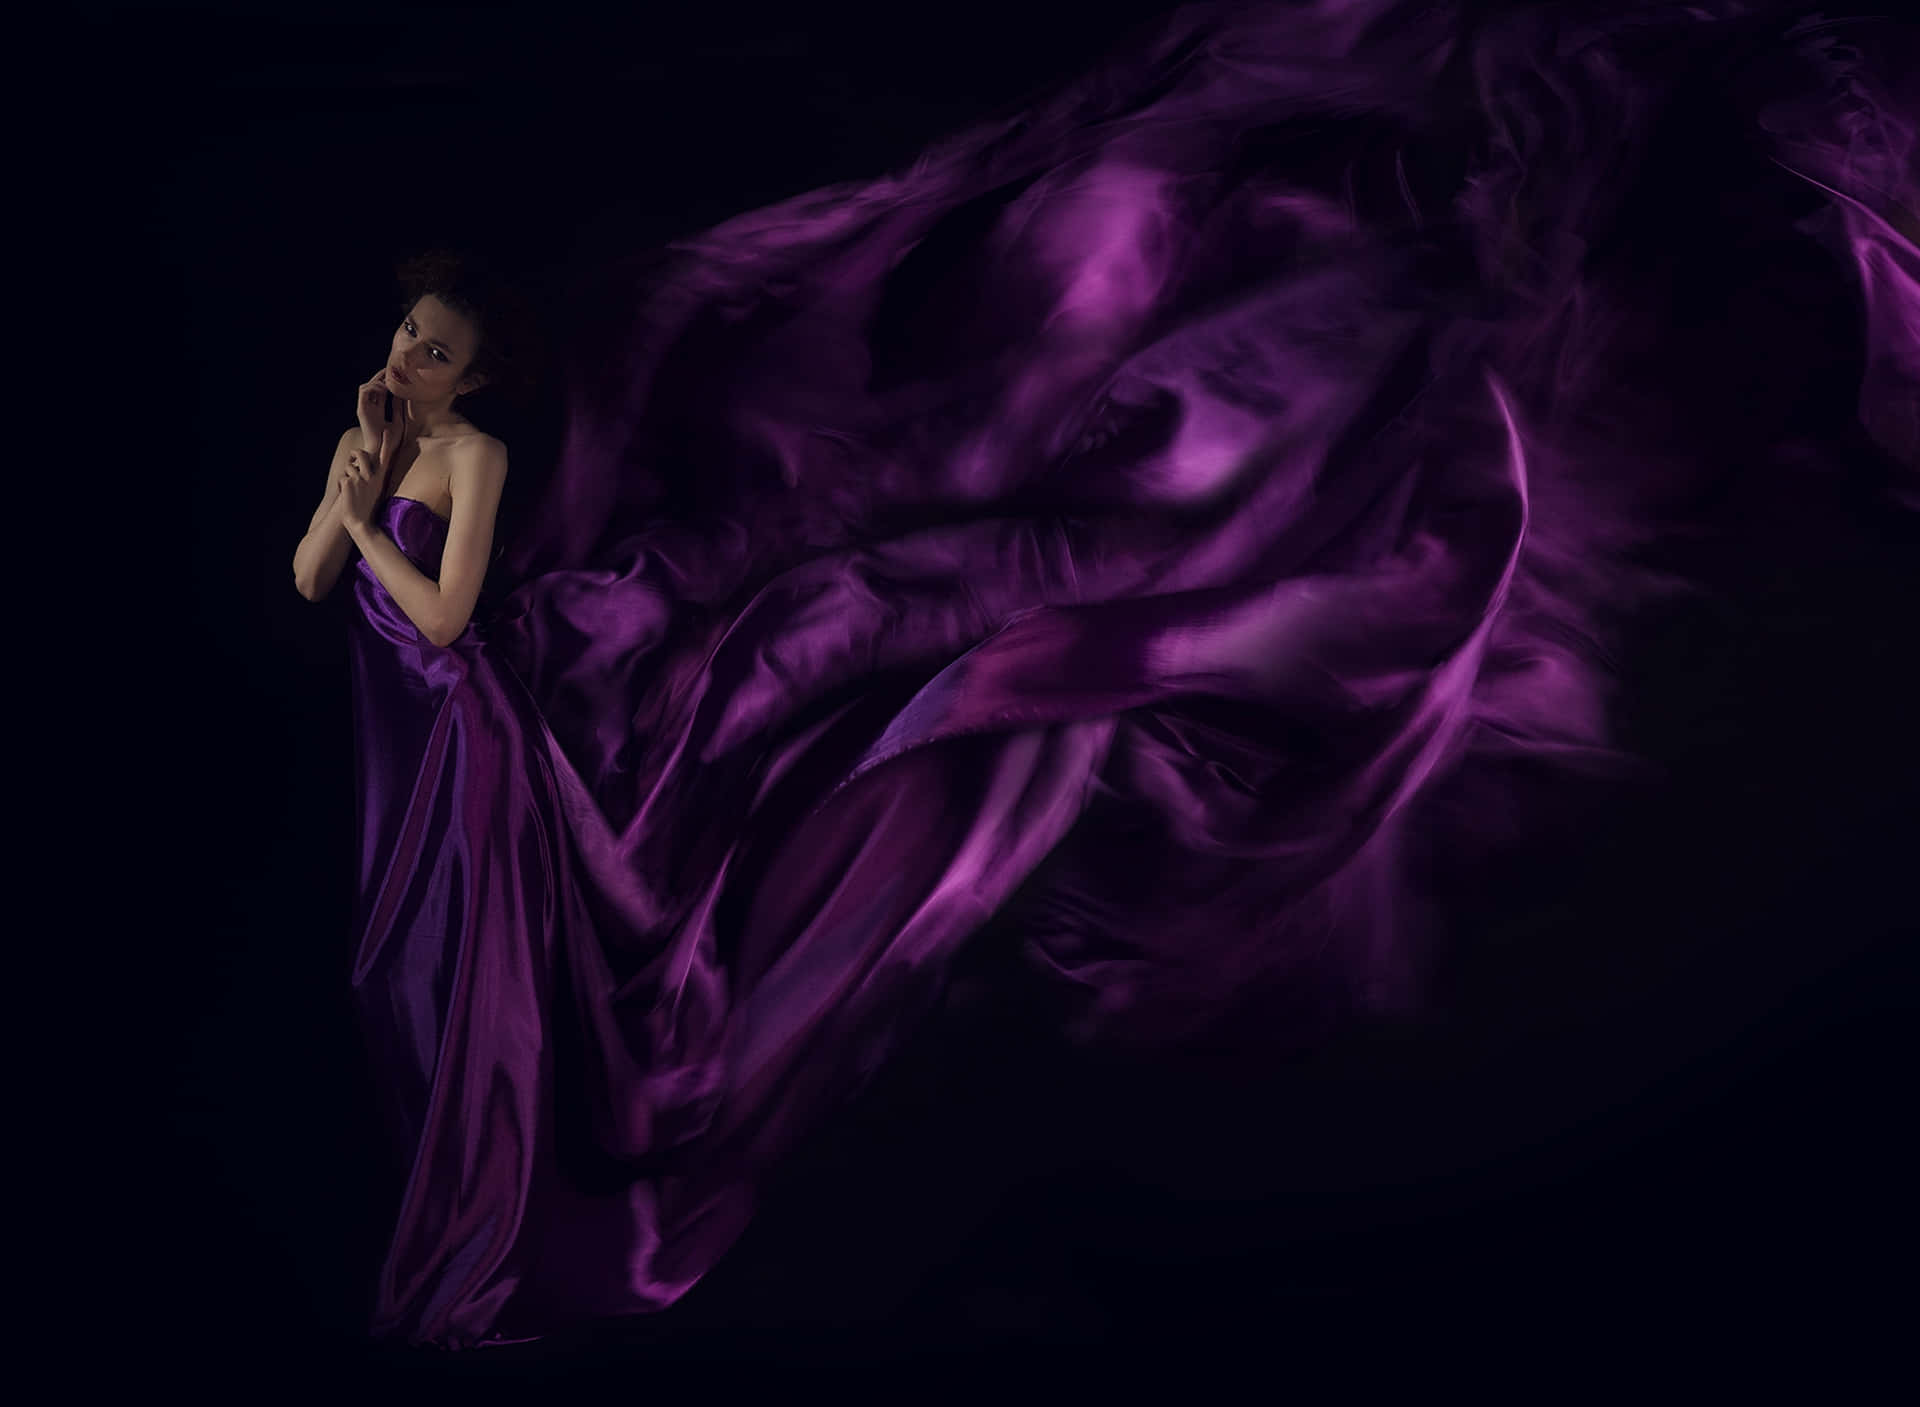 A Woman In A Purple Dress Is Standing On A Black Background